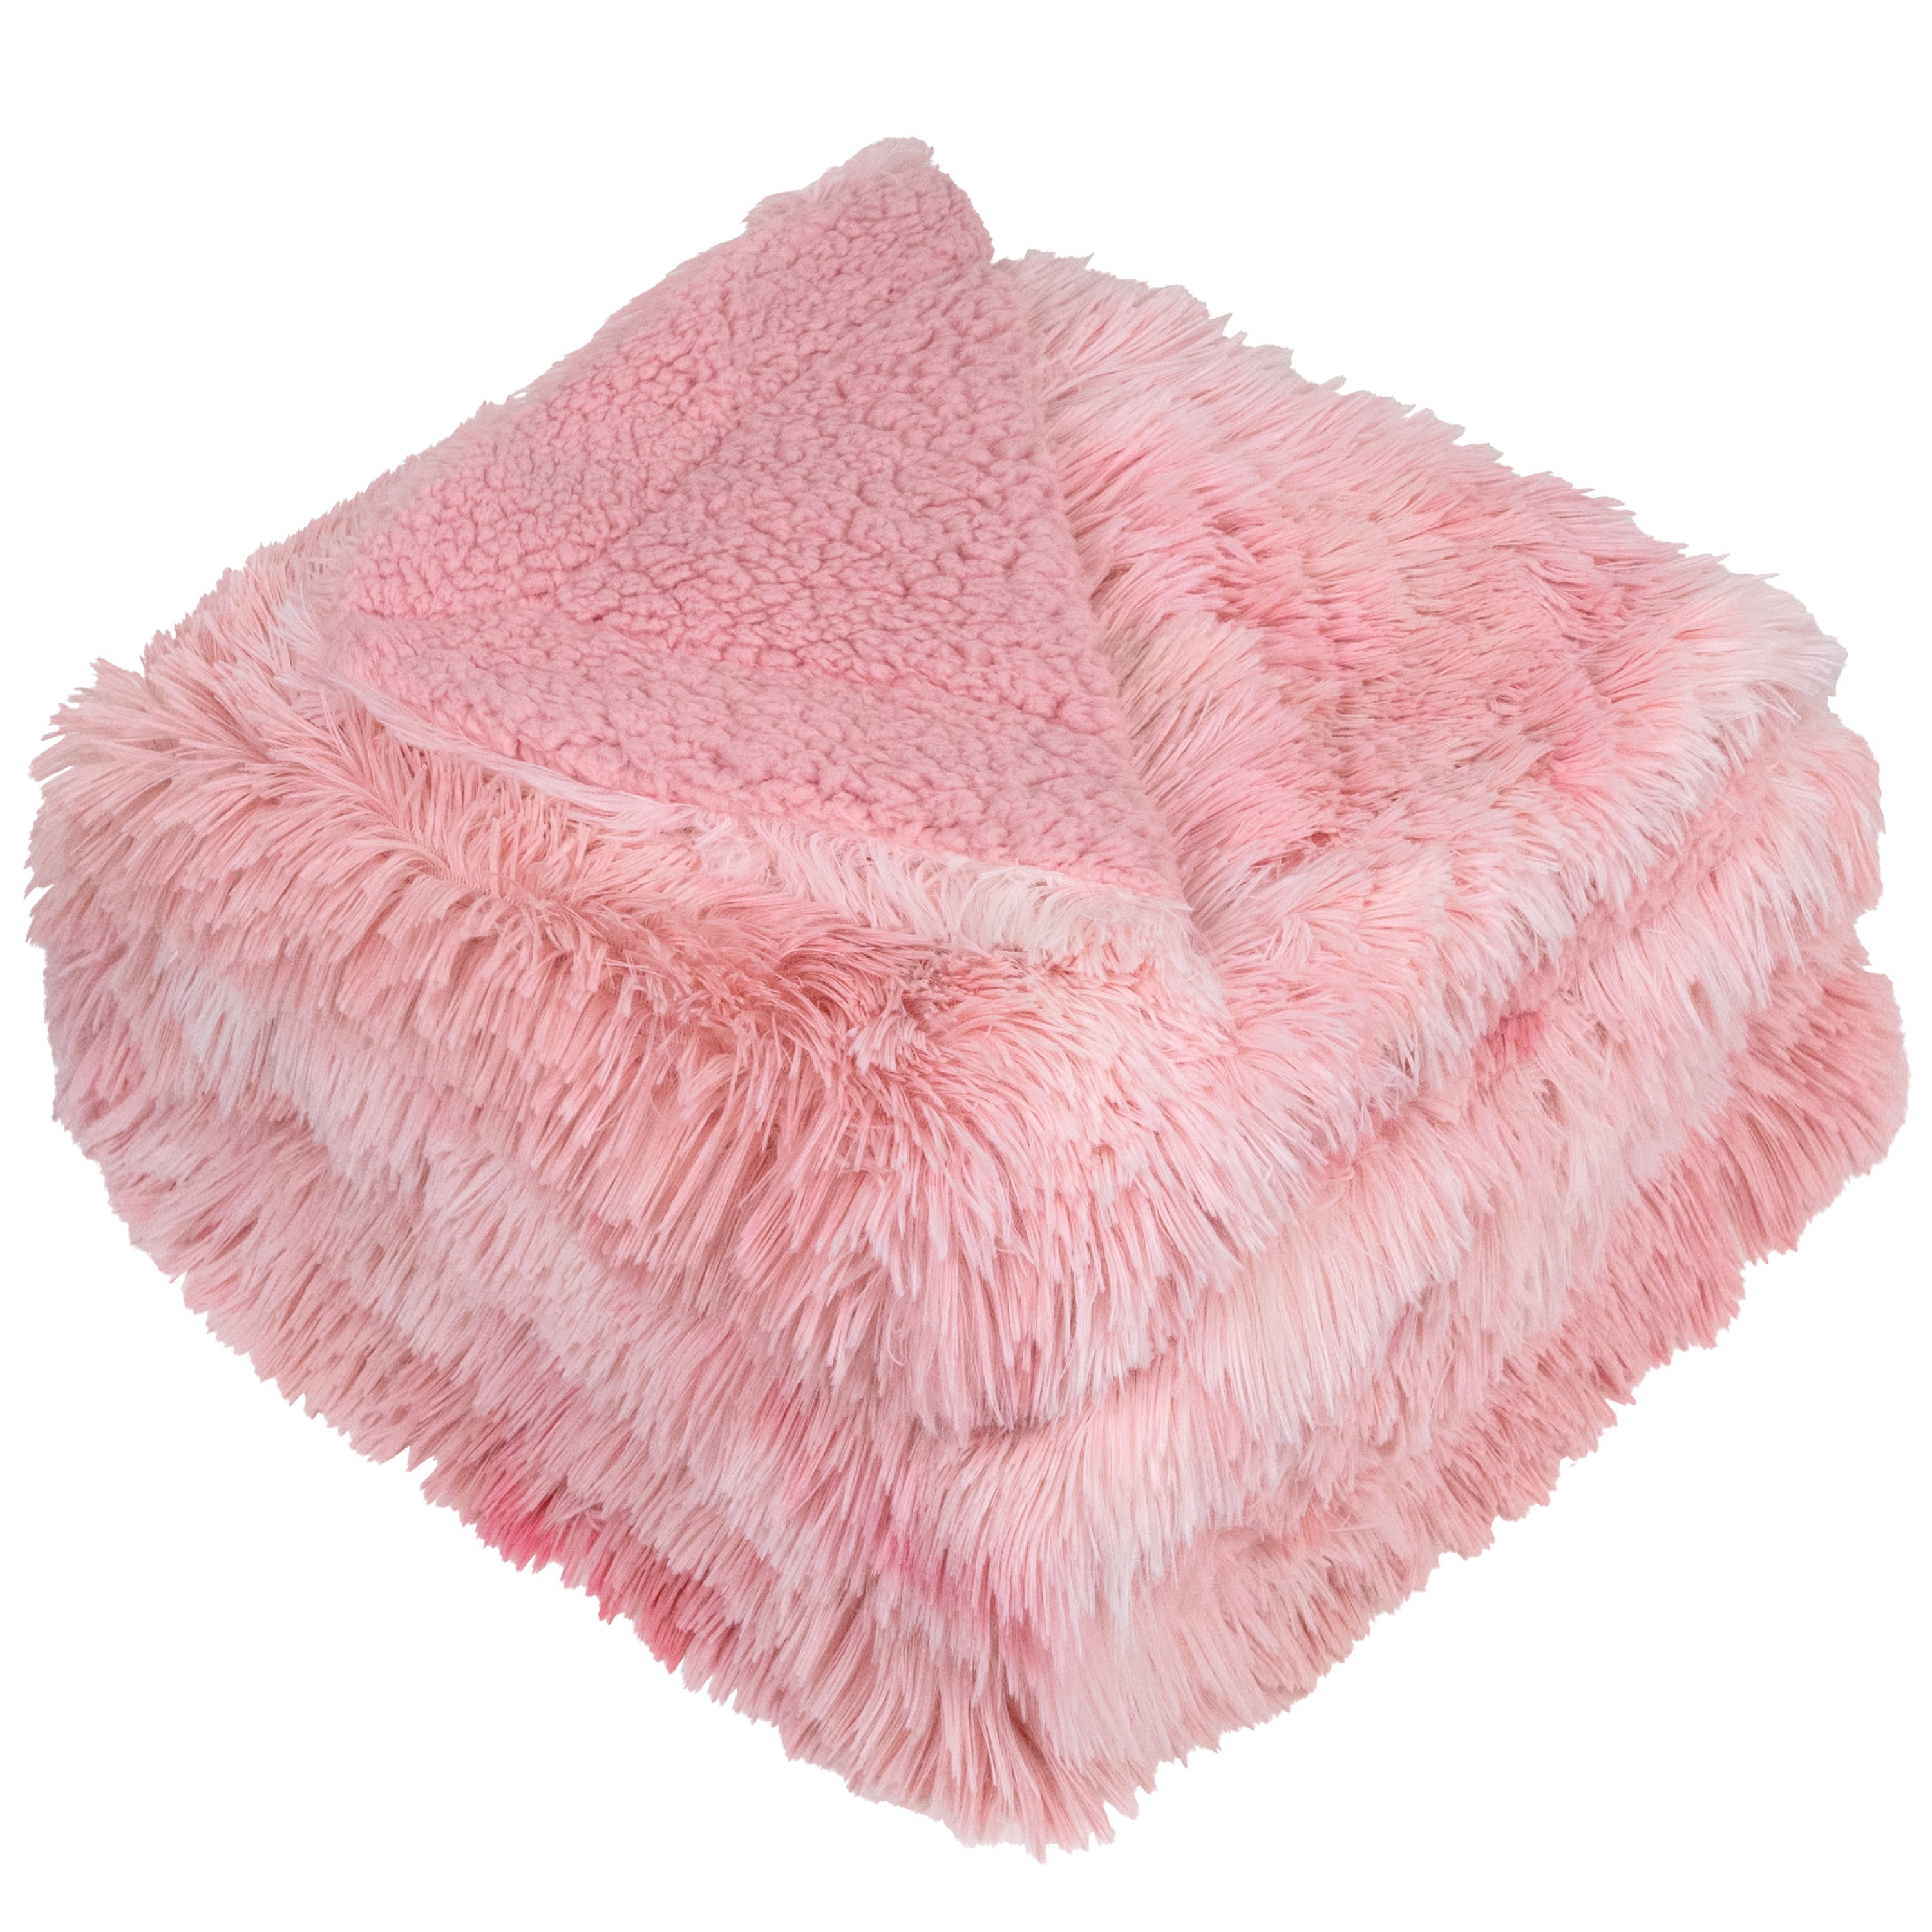 PAVILIA Soft Fluffy Faux Fur Throw Blanket, Twin Tie-Dye Pink, Shaggy Furry  Warm Sherpa Blanket Fleece Throw for Bed, Sofa, Couch, Decorative Fuzzy  Plush Comfy Thick Throw Blanket, 60x80 Inches 